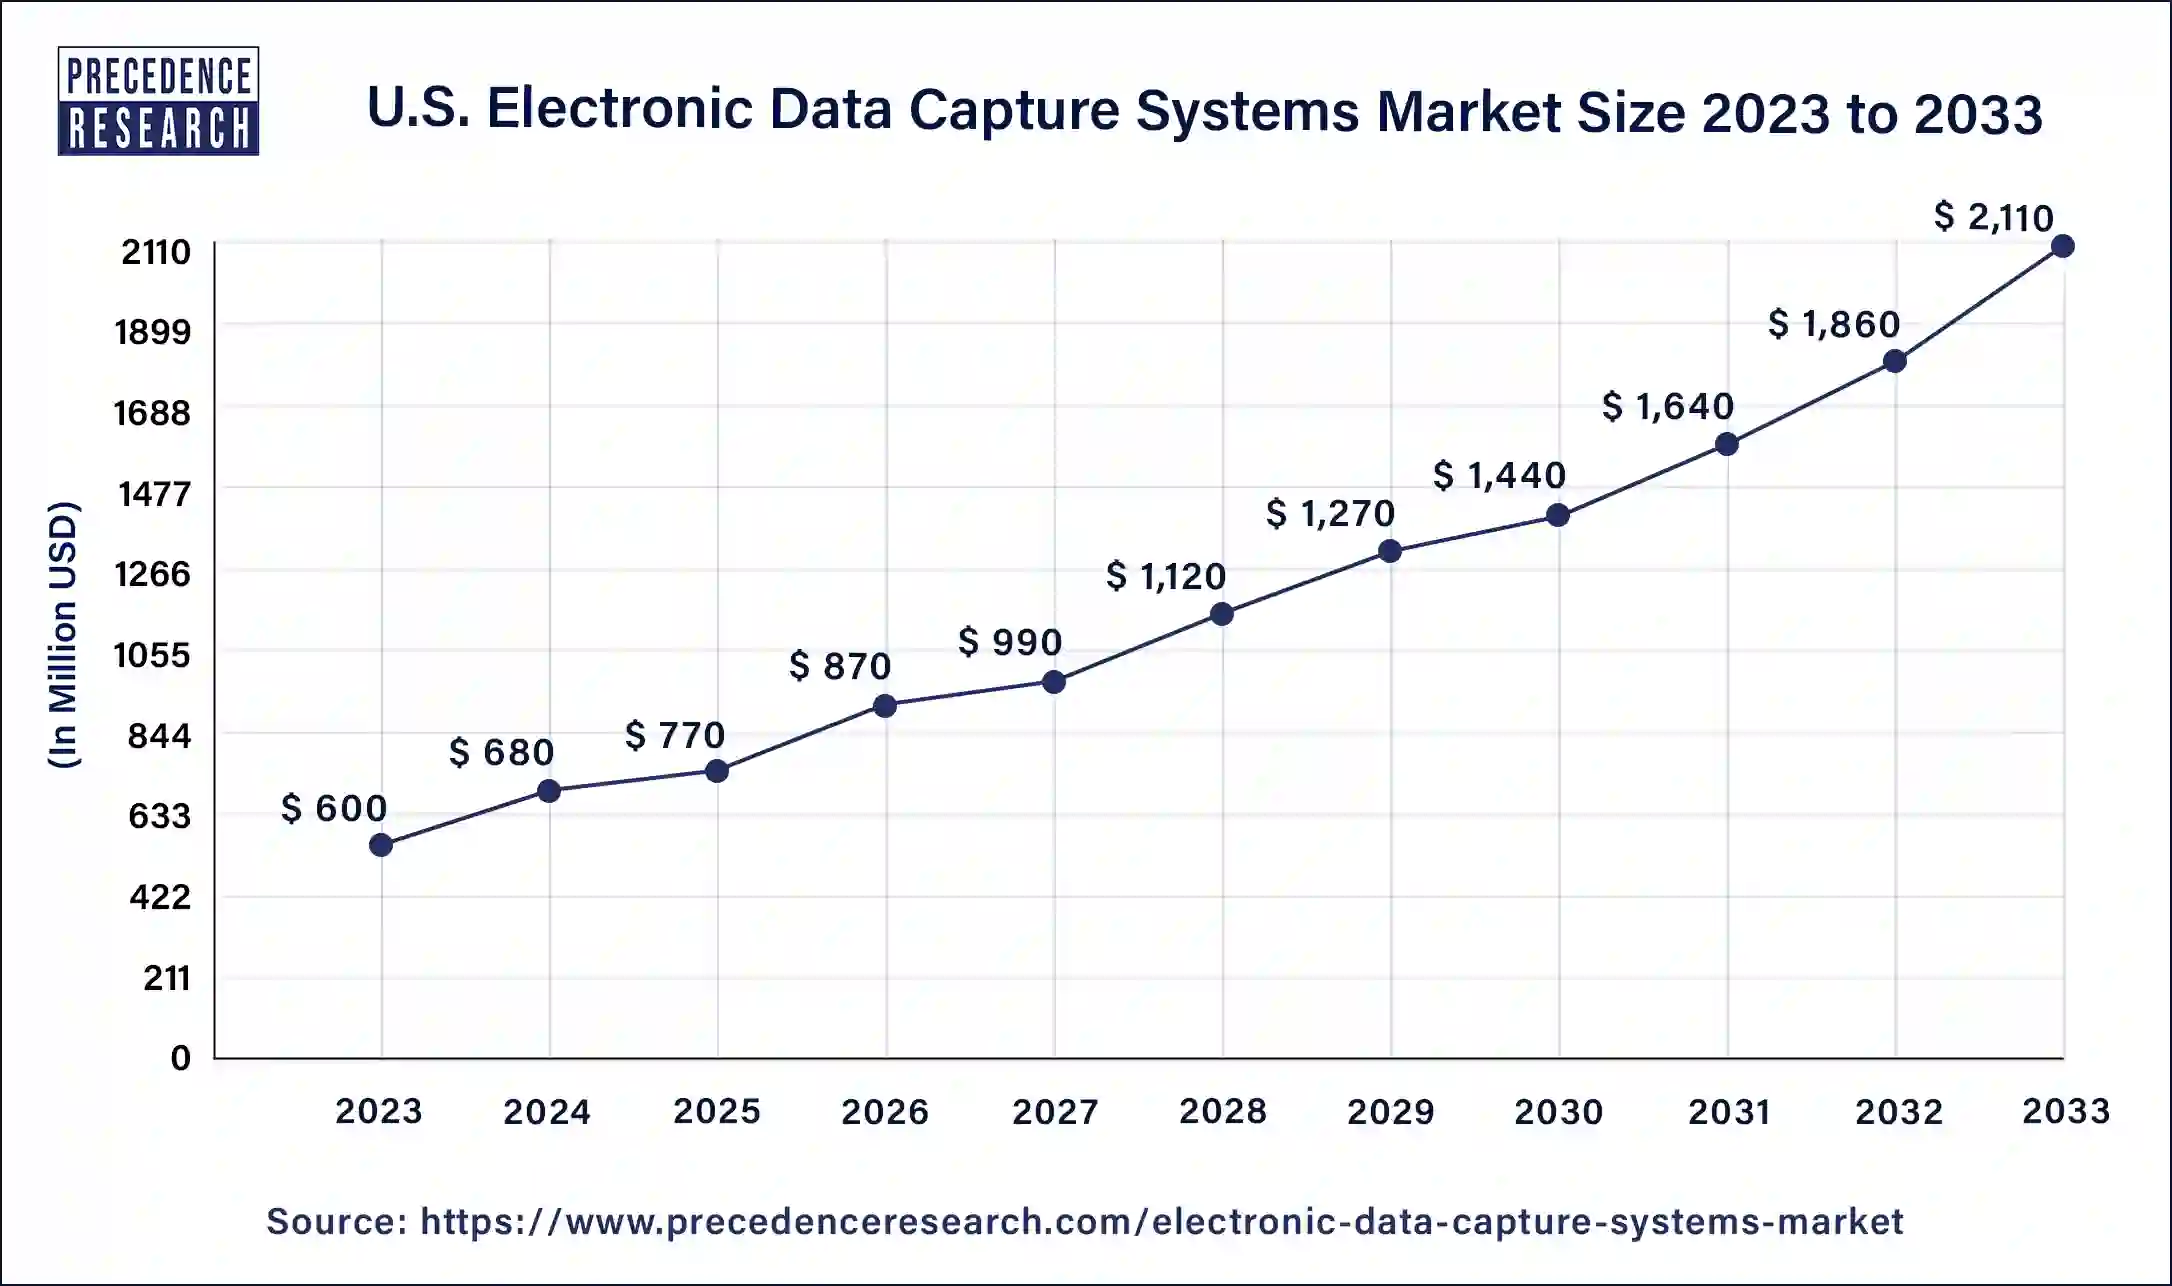 U.S. Electronic Data Capture Systems Market Size 2024 to 2033